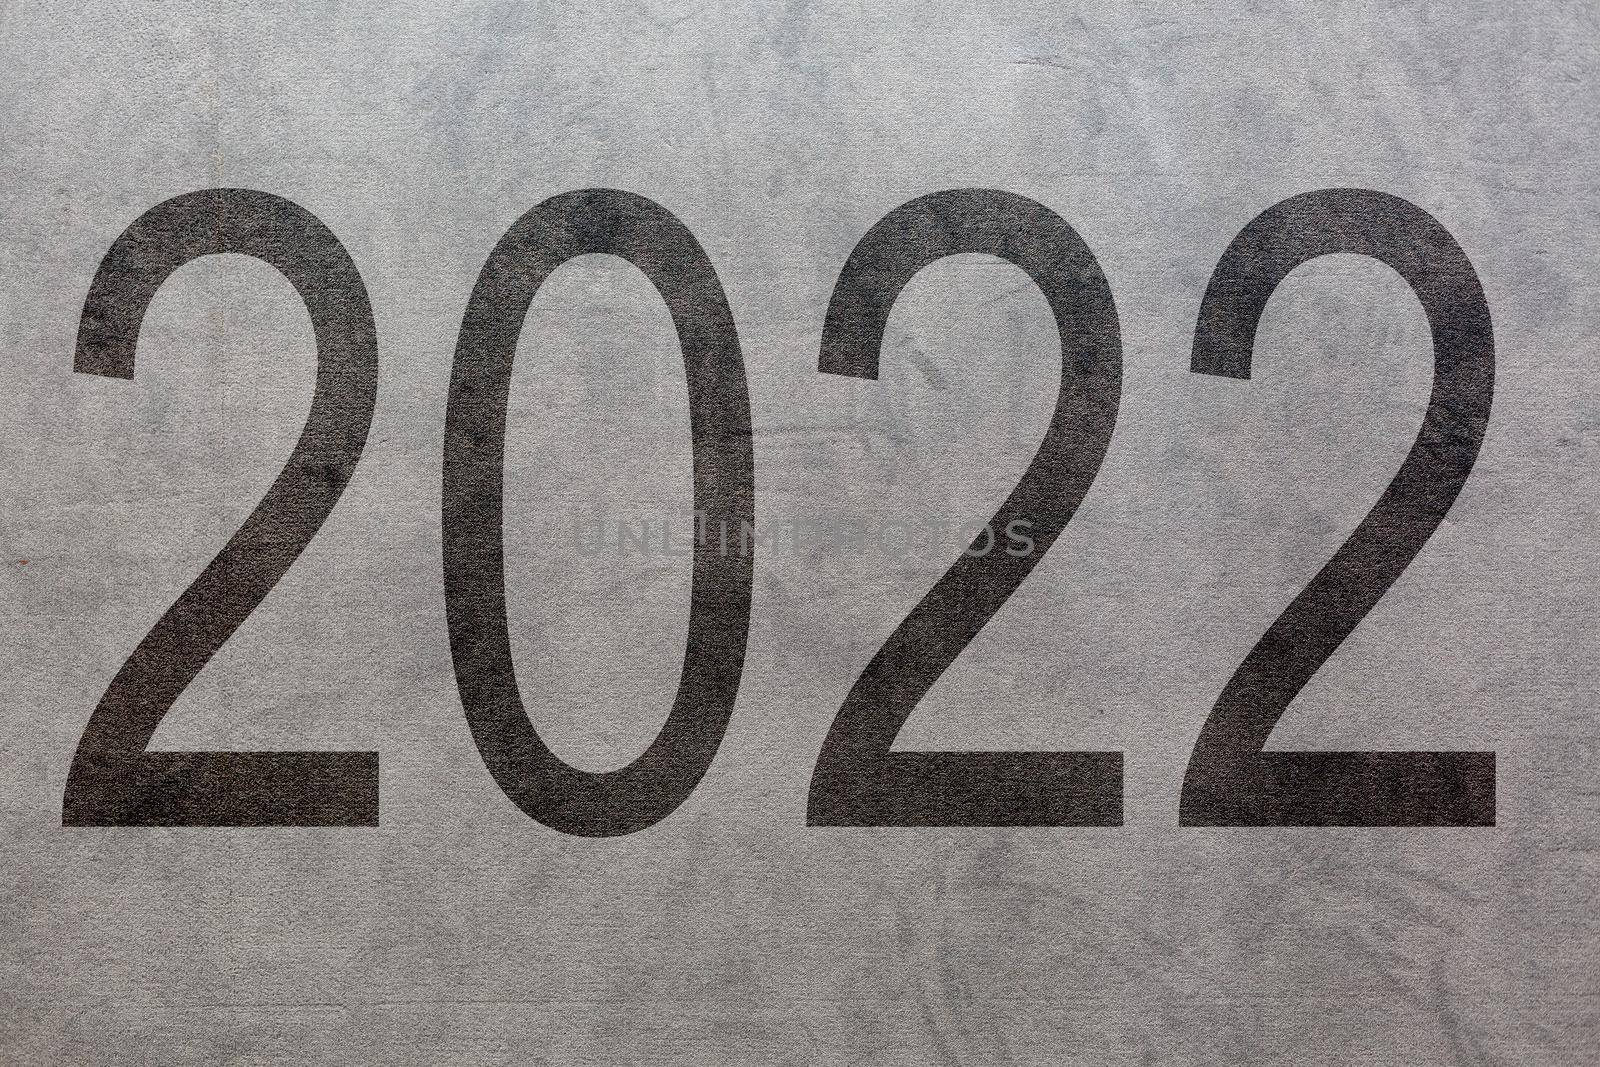 The year 2022 written in vintage background by Andelov13